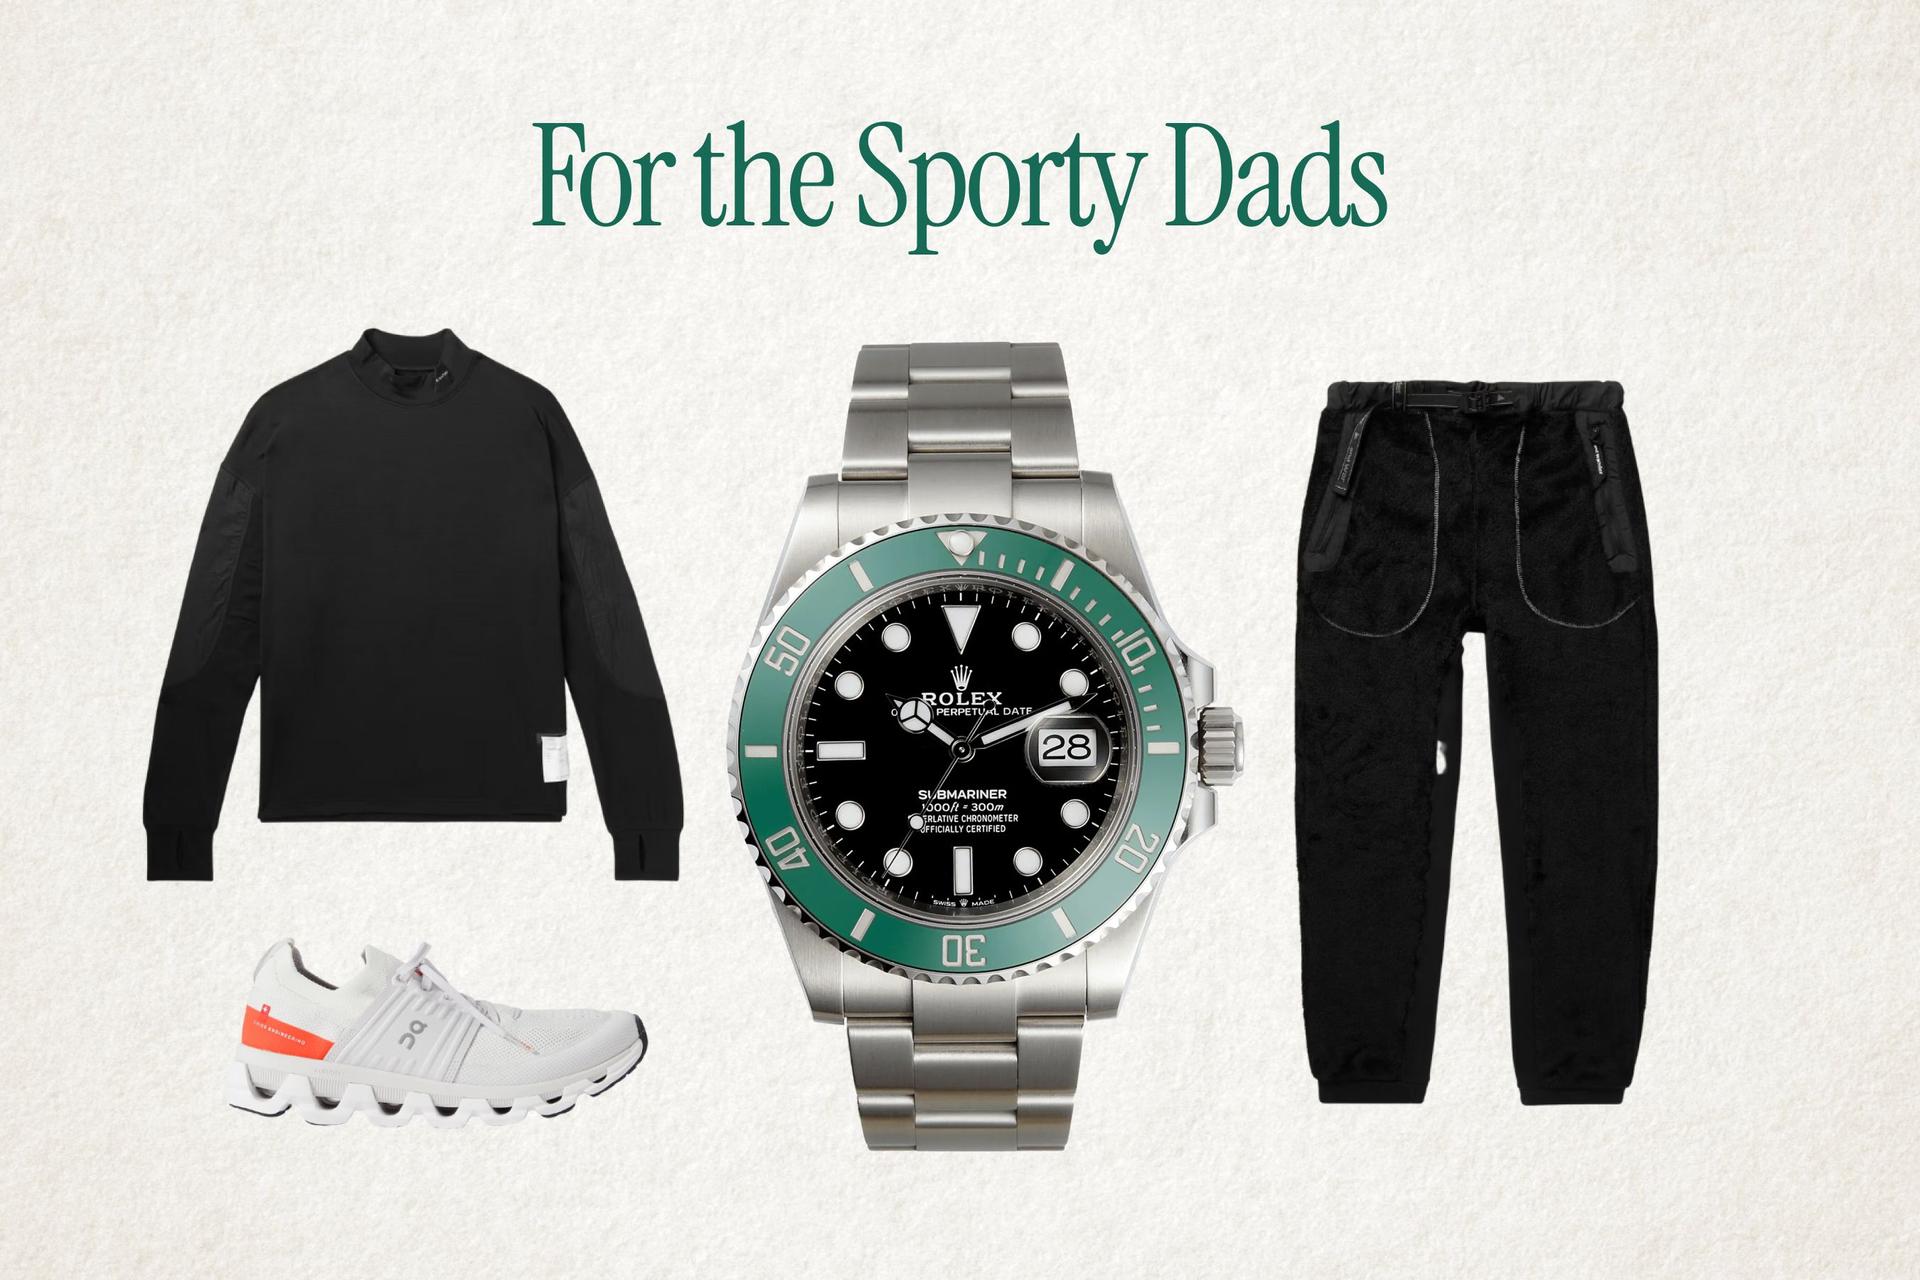 Article Image #1_Sporty dads.jpg